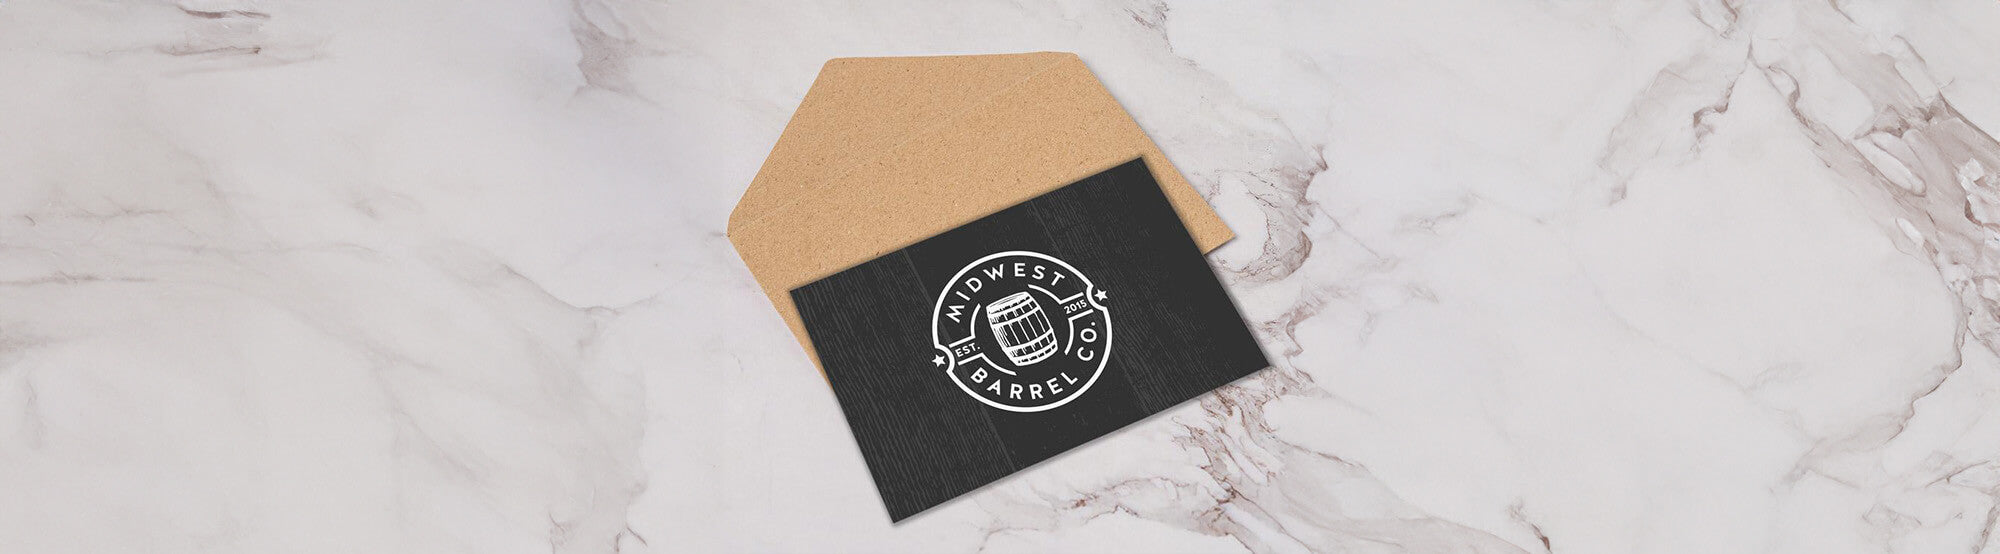 Midwest Barrel Co. gift card with barrel logo in center on top of an envelope